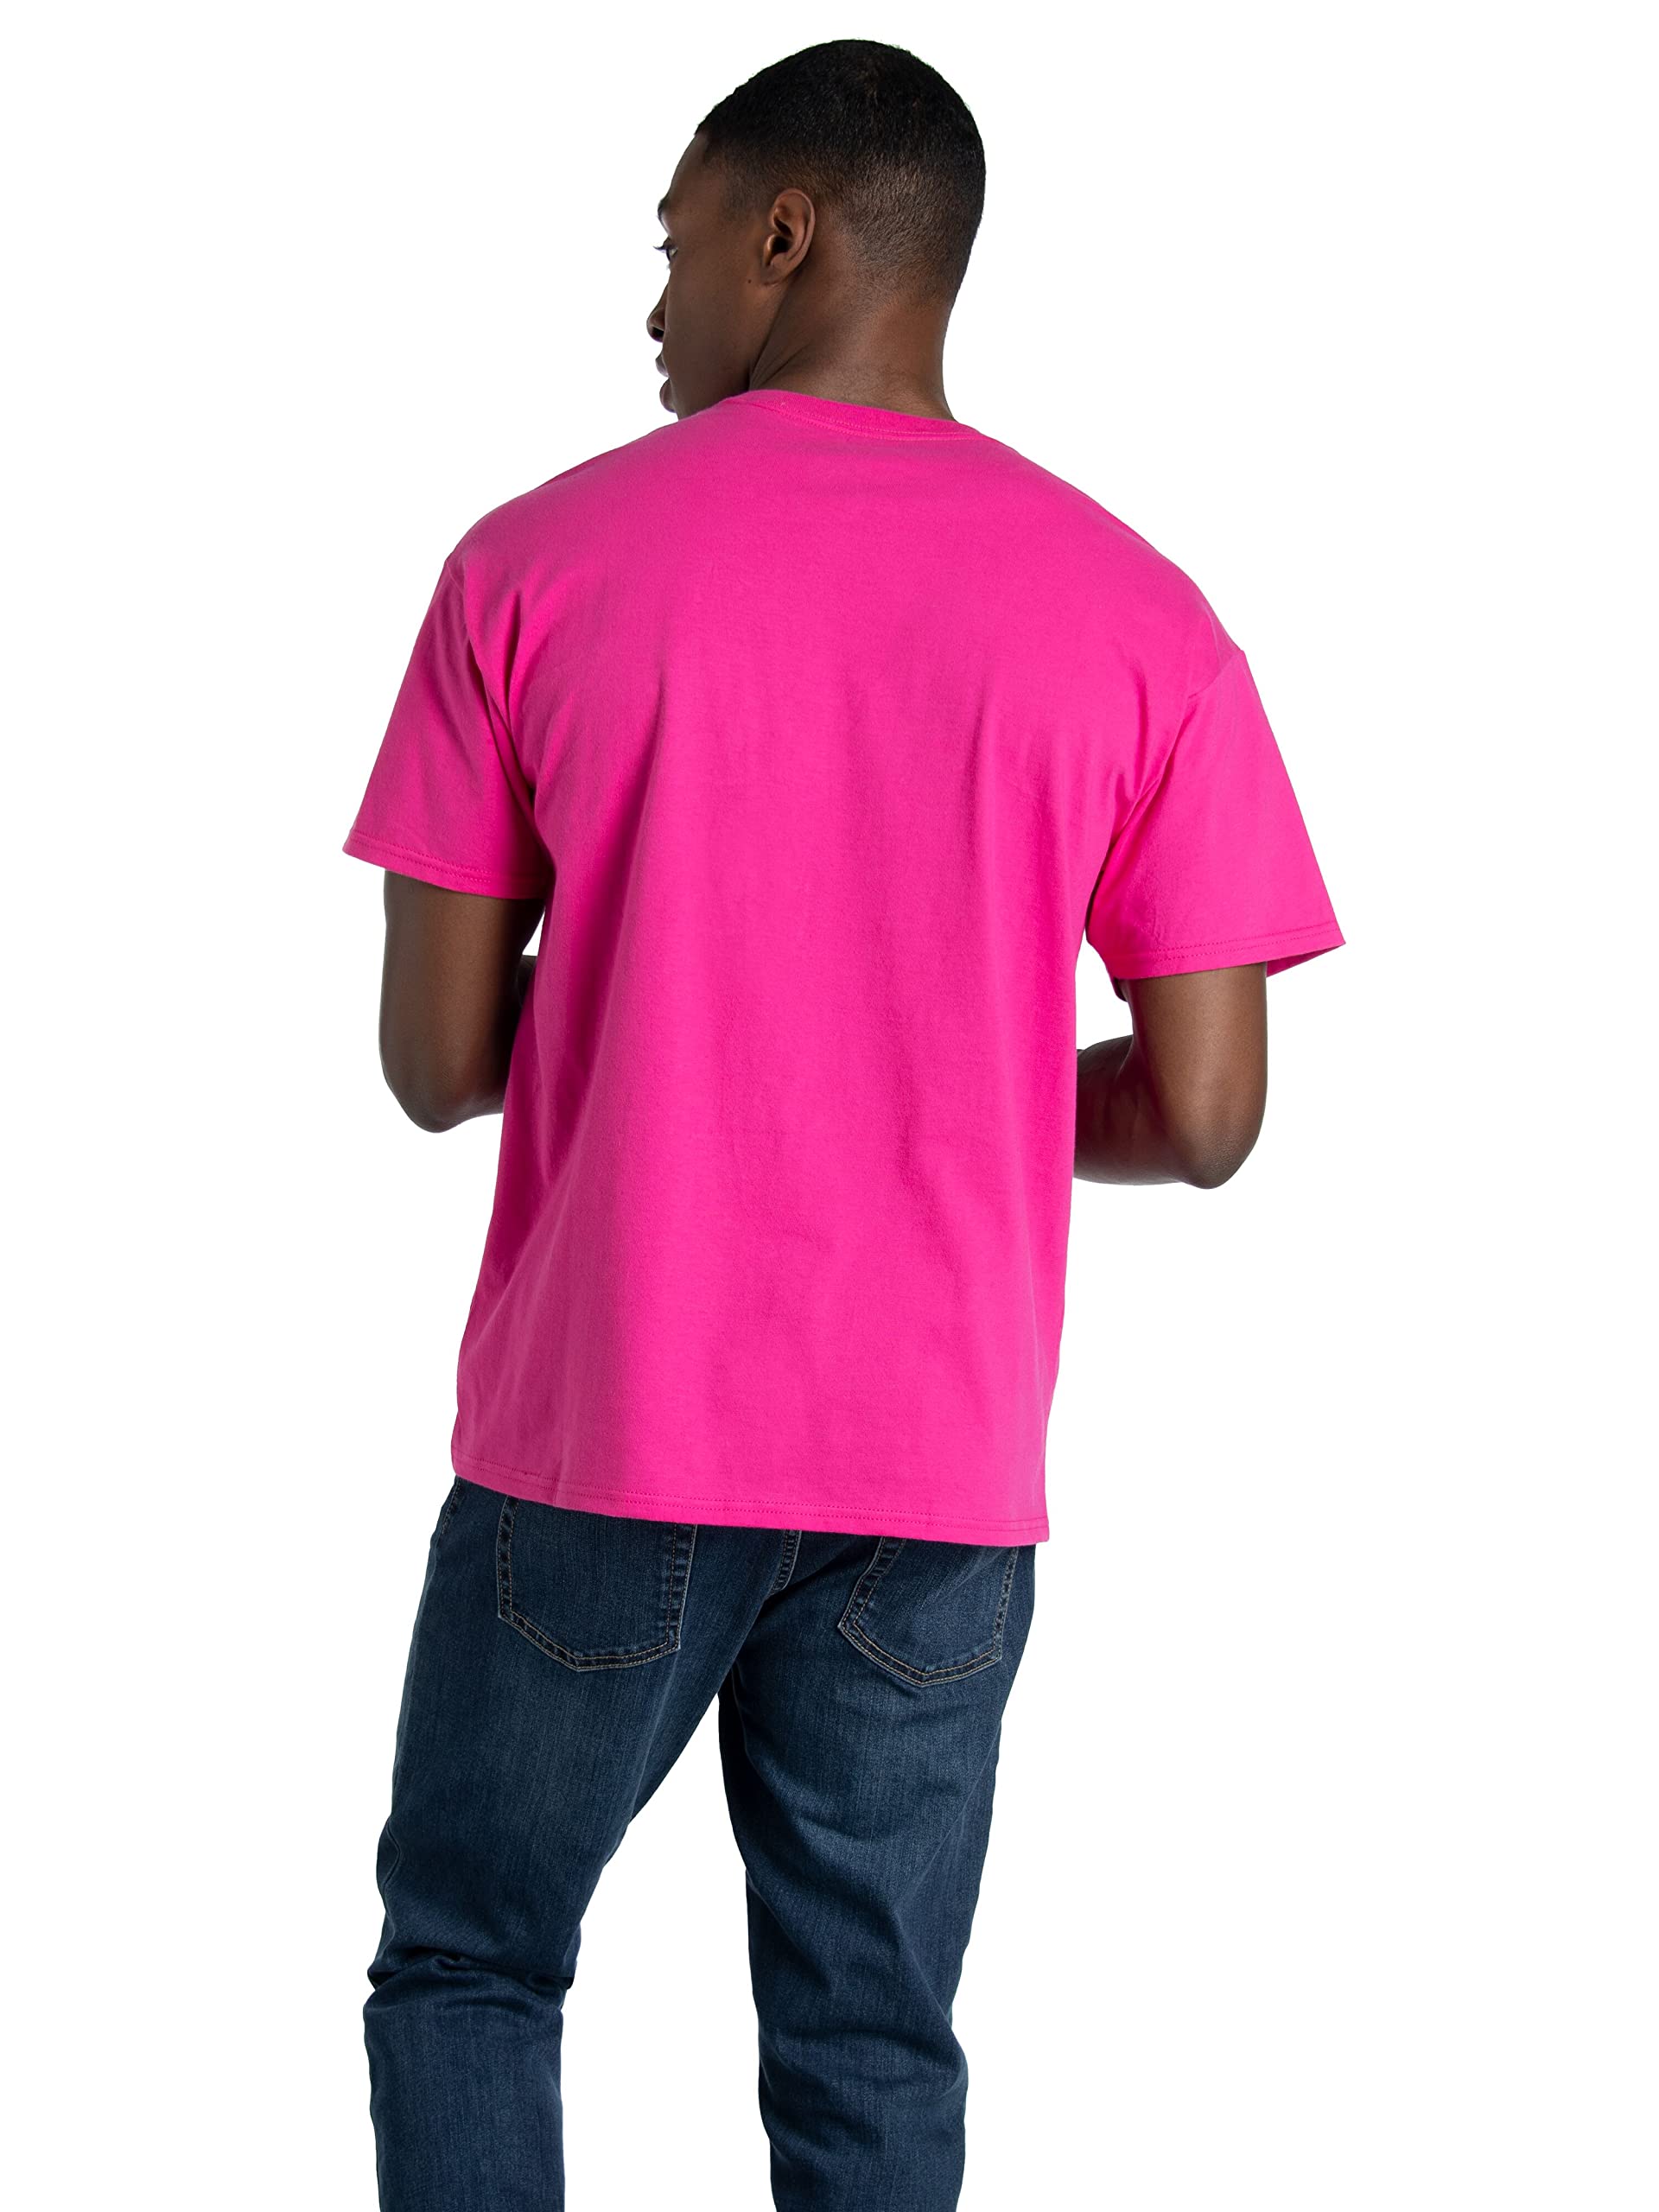 Fruit of the Loom Men's Eversoft Cotton T Shirts, Breathable & Moisture Wicking with Odor Control, Sizes S-4x